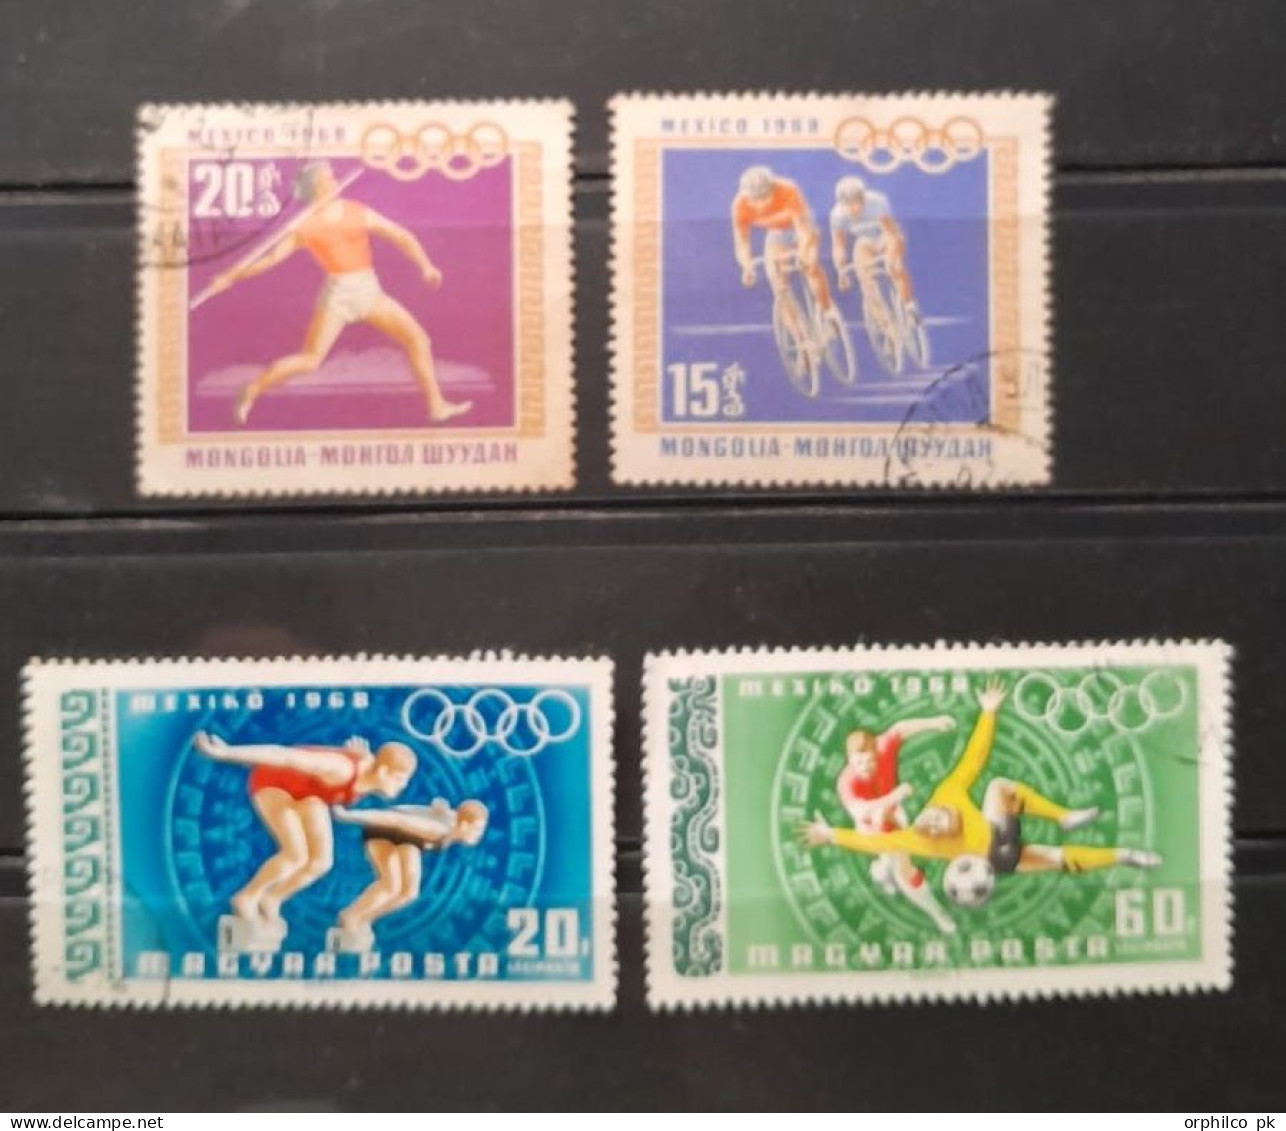 MEXICO CITY Olympic 1968 USED Javelin Cycling Swiming Football Coccer Mongolia Hungery Gold Medal - Estate 1968: Messico